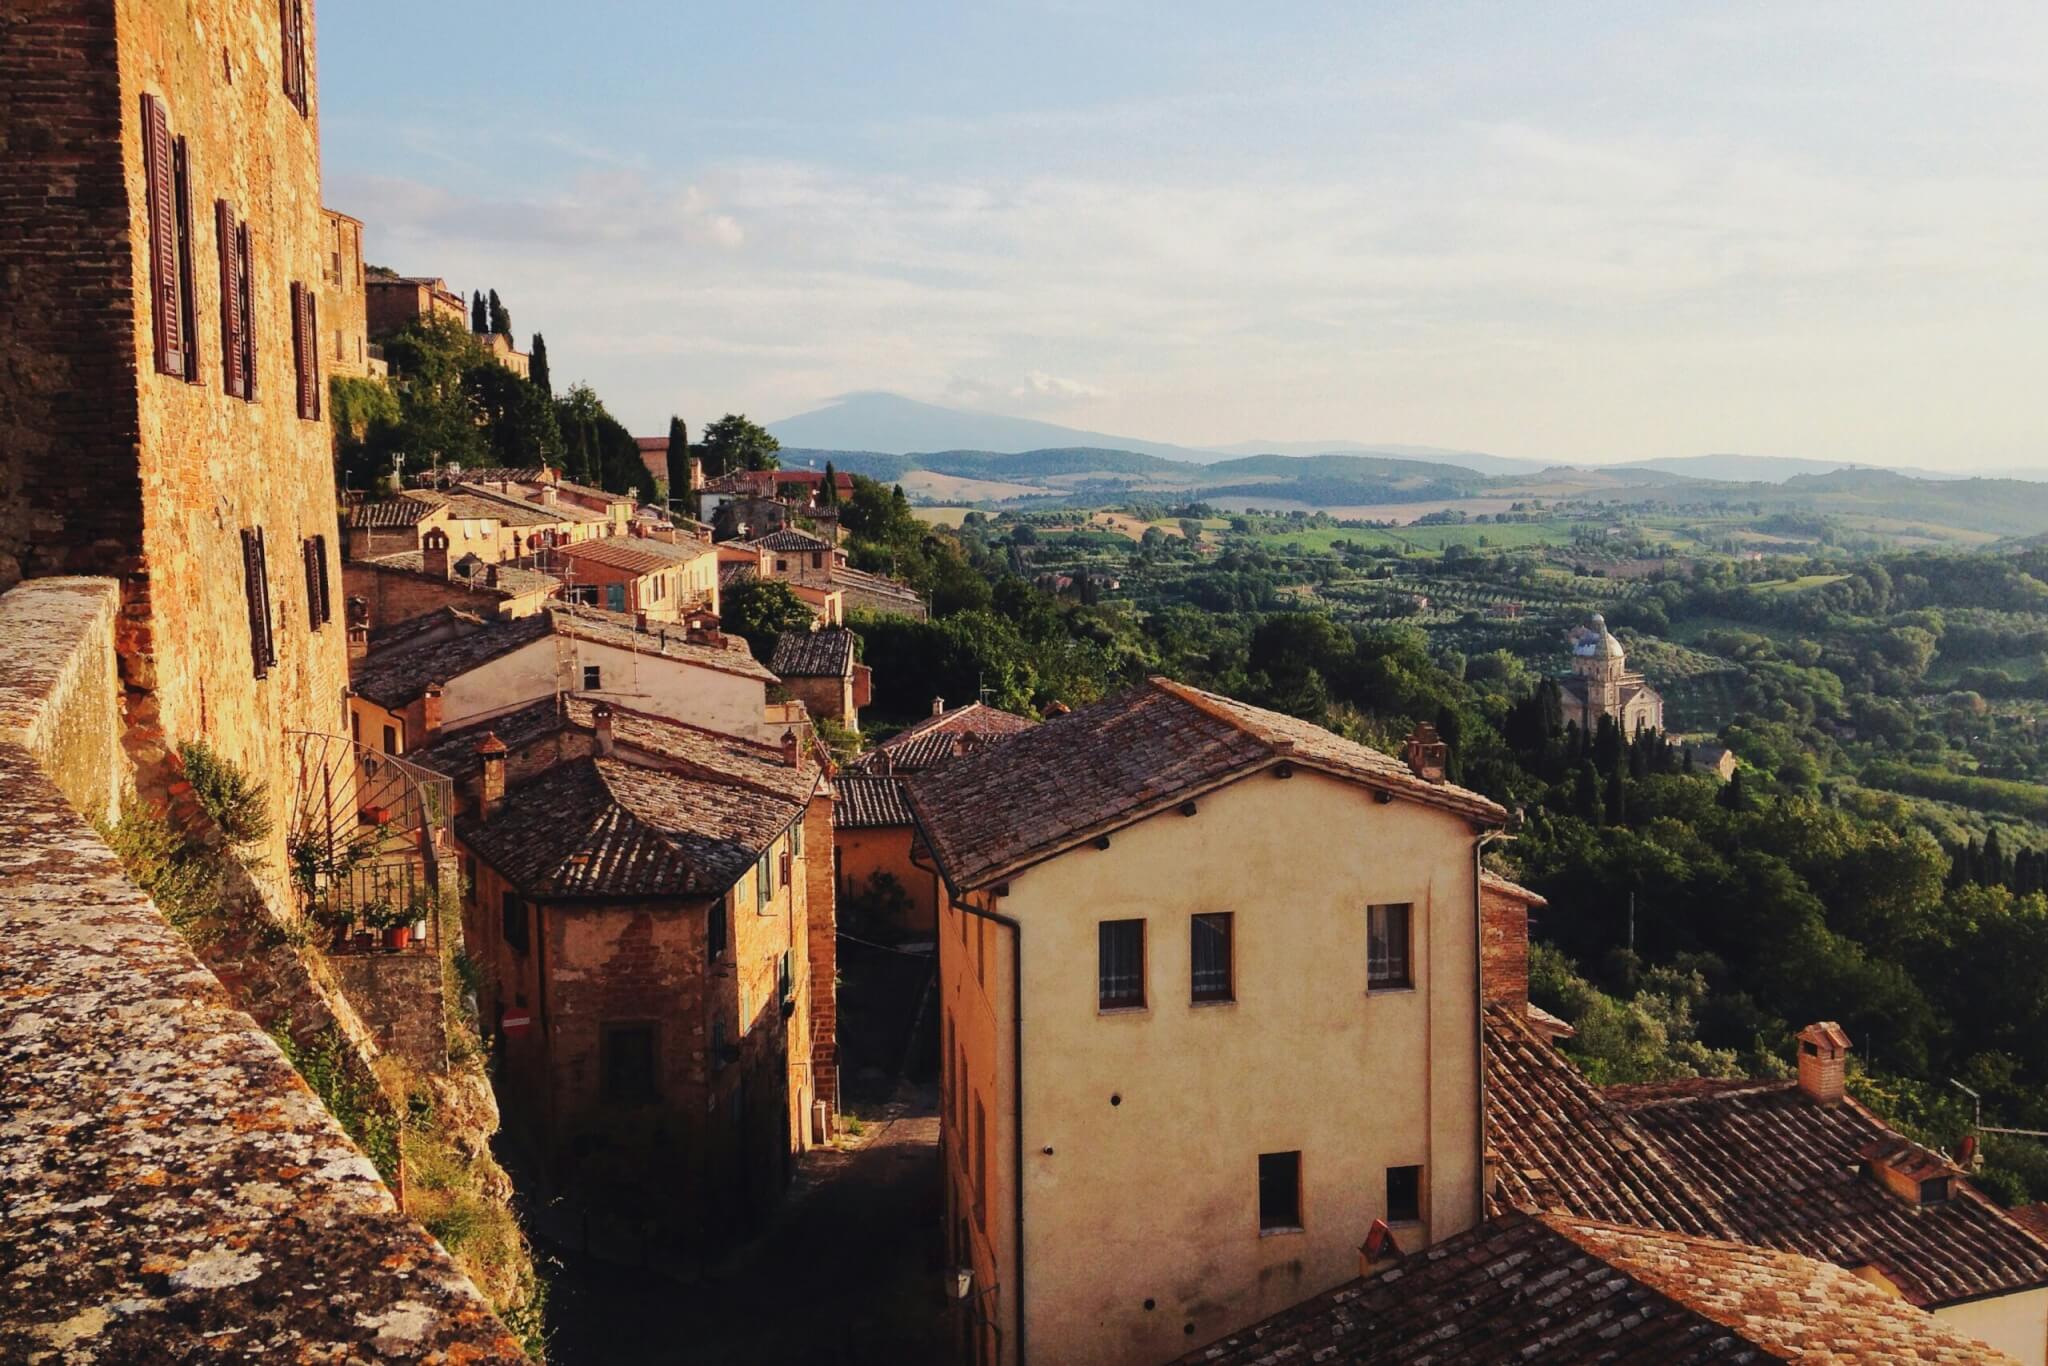 <p>Our 50s are a wonderful decade where we know who we are, are settled down with family and friends and are gearing up for our retirement plans. Nothing says, "You've earned it," like the rolling hills of Tuscany and nearby Florence. All the <a href="https://travelreveal.com/category/destination-guides/">best travel guides</a> include these locales and it's easy to see why. </p> <p>In Tuscany, you'll sip on some of the finest wine this side of heaven and enjoy decadent meals crafted by the descendants of Italian gods. Tours of wineries abound and every drive will serve the most spectacular views. </p> <p>Of course, while in Florence, you'll want to visit the Duomo, which began in 1296, and Ponte Vecchio, which was erected during Roman times. Most of Italy will leave you in awe, wondering how these ancient structures are still standing. </p> <p>Since you've made it all the way to Tuscany, you might consider the hour-and-a-half train ride down to Rome to continue your culinary delights and historical explorations. </p> <p>Of course, before you go, you have to watch Diane Lane's performance in Under the Tuscan Sun. She's nowhere near 50 in the film, but she's certainly gearing up for her next chapter in life. </p>